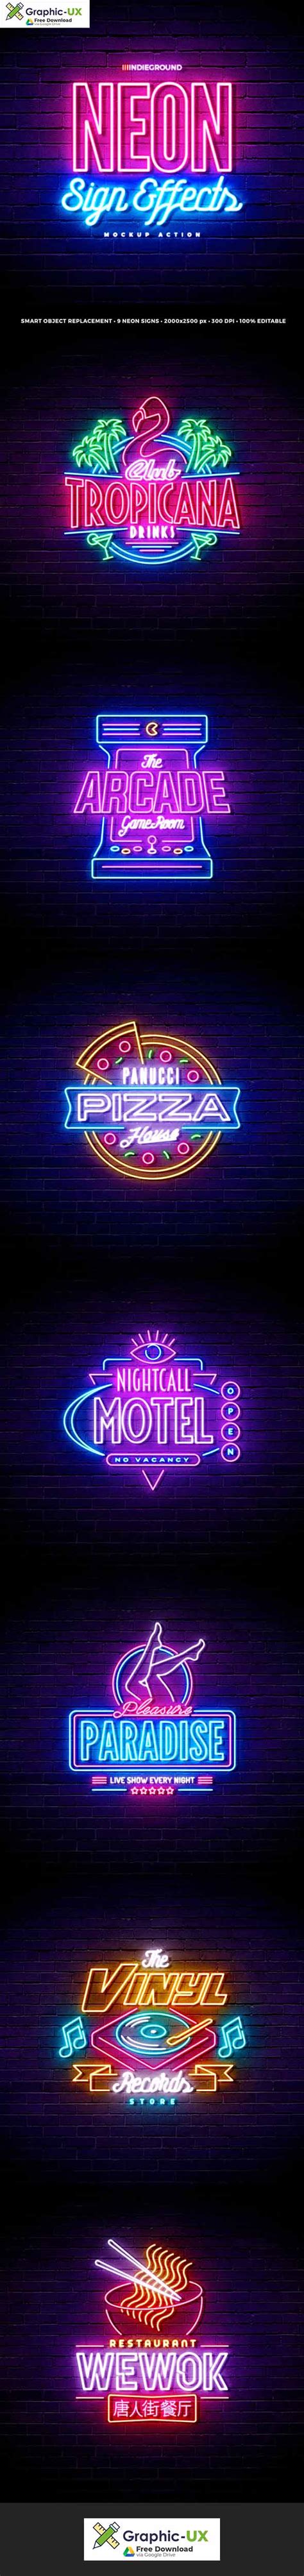 Neon Sign Effects Free Graphicux